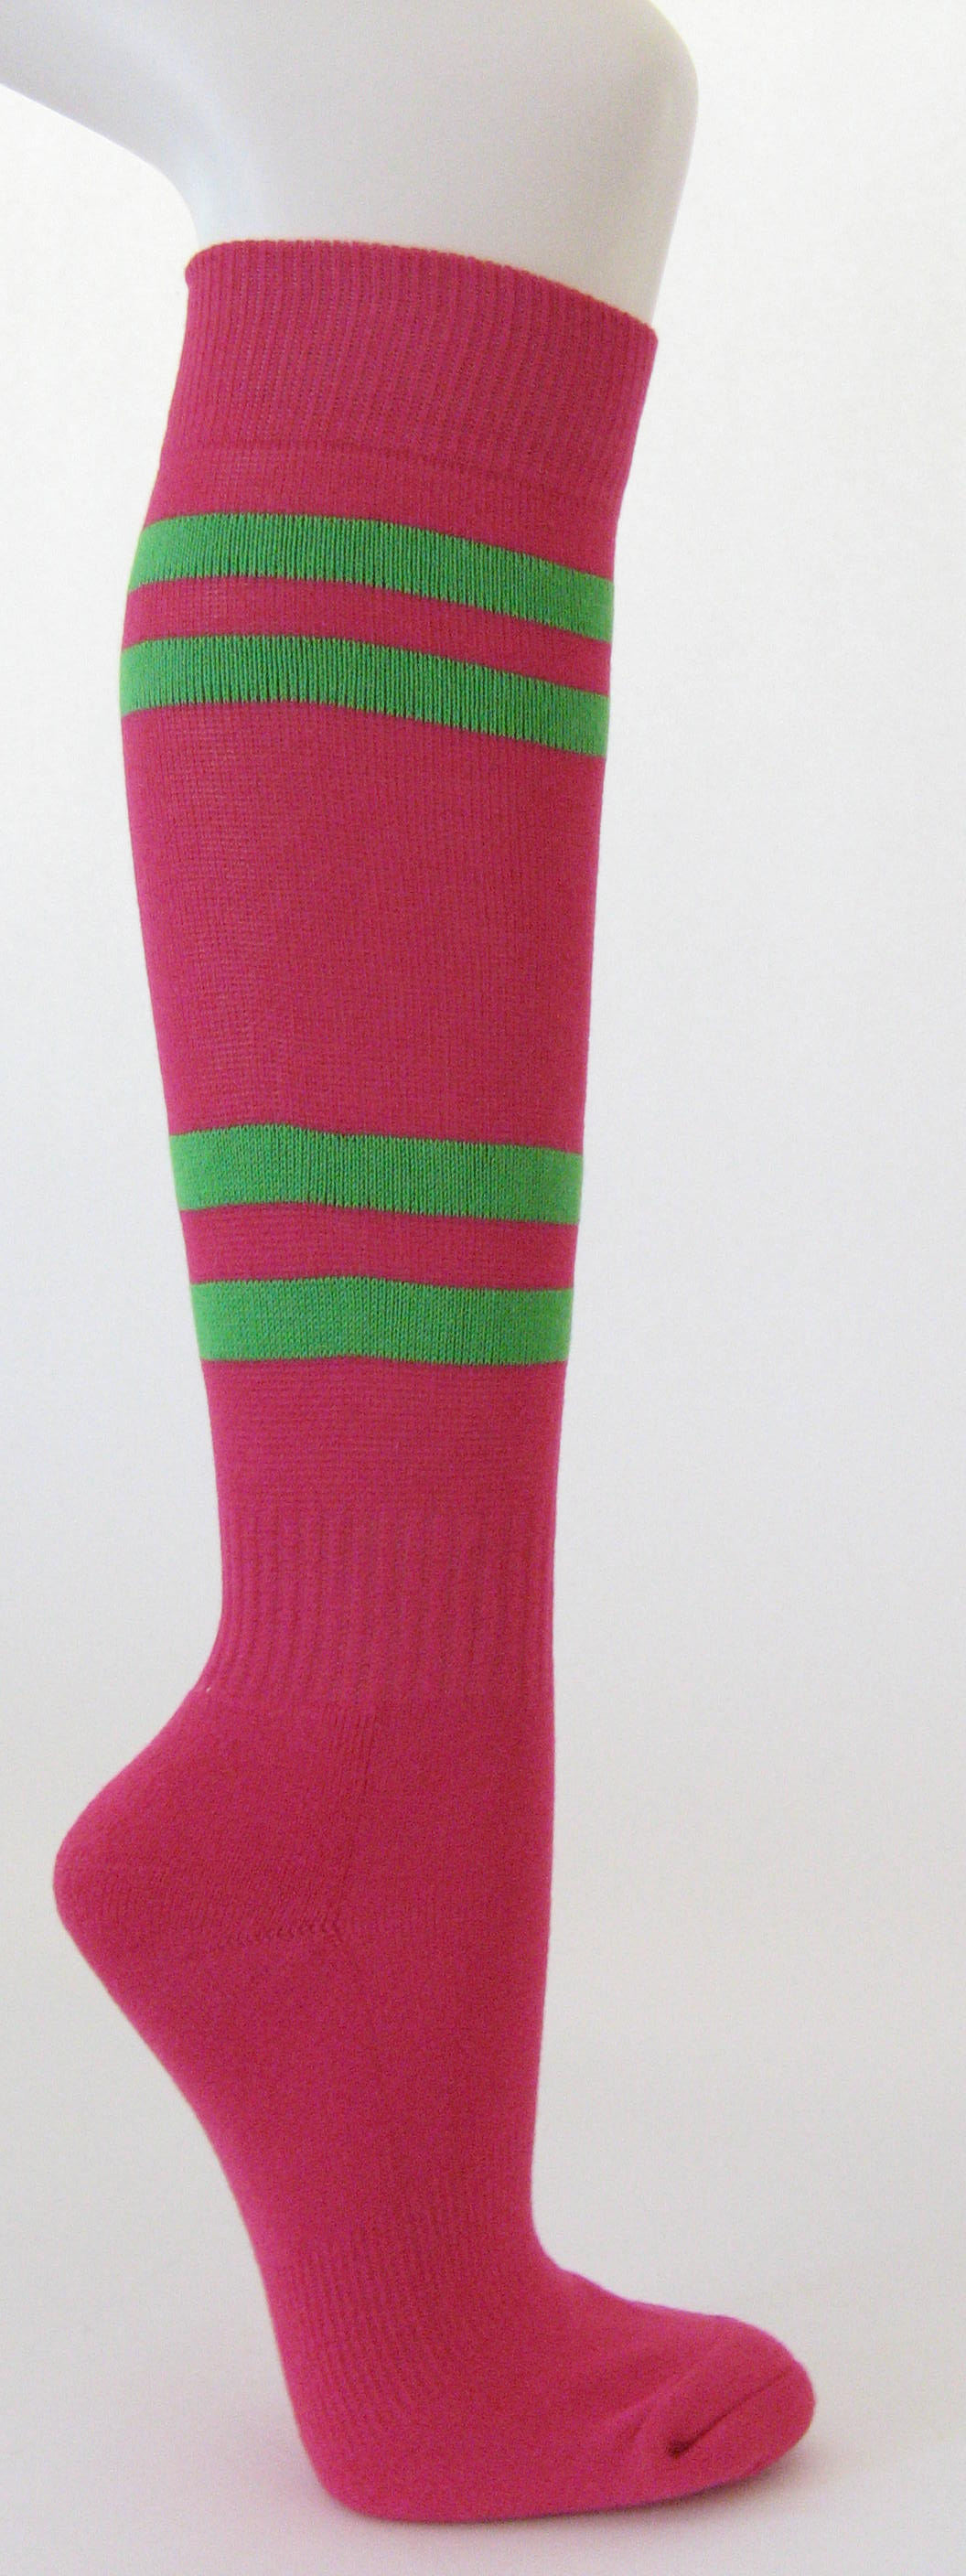 Hot pink cotton knee socks with bright green stripes - Click Image to Close